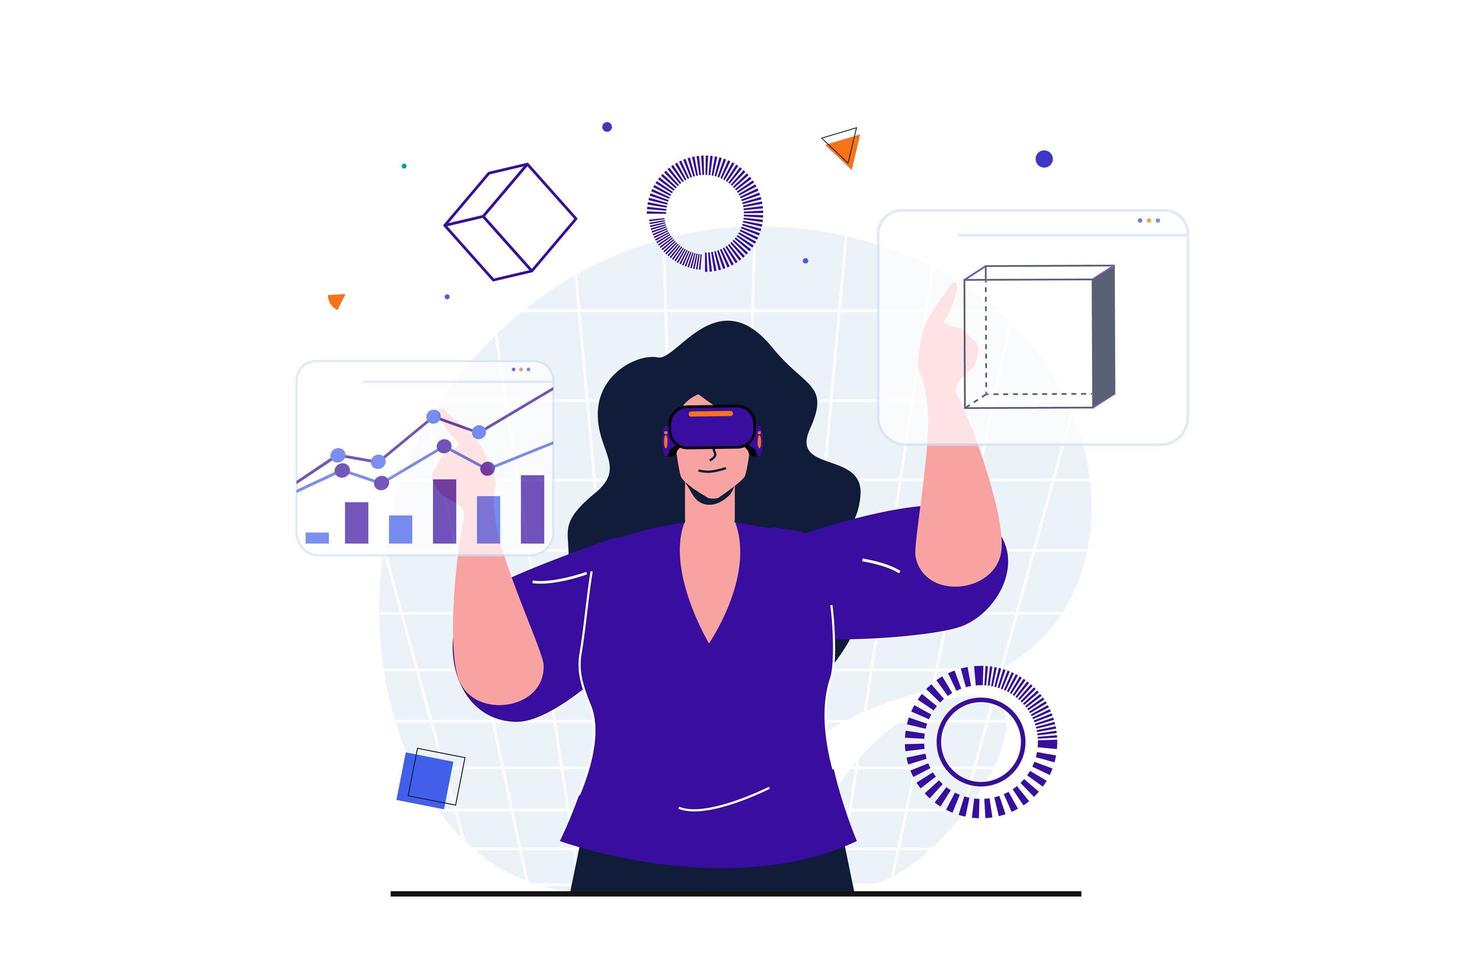 Cyberspace modern flat concept for web banner design. Woman in VR glasses interacts data graphs and doing scientific research in simulated dashboard. Vector illustration with isolated people scene